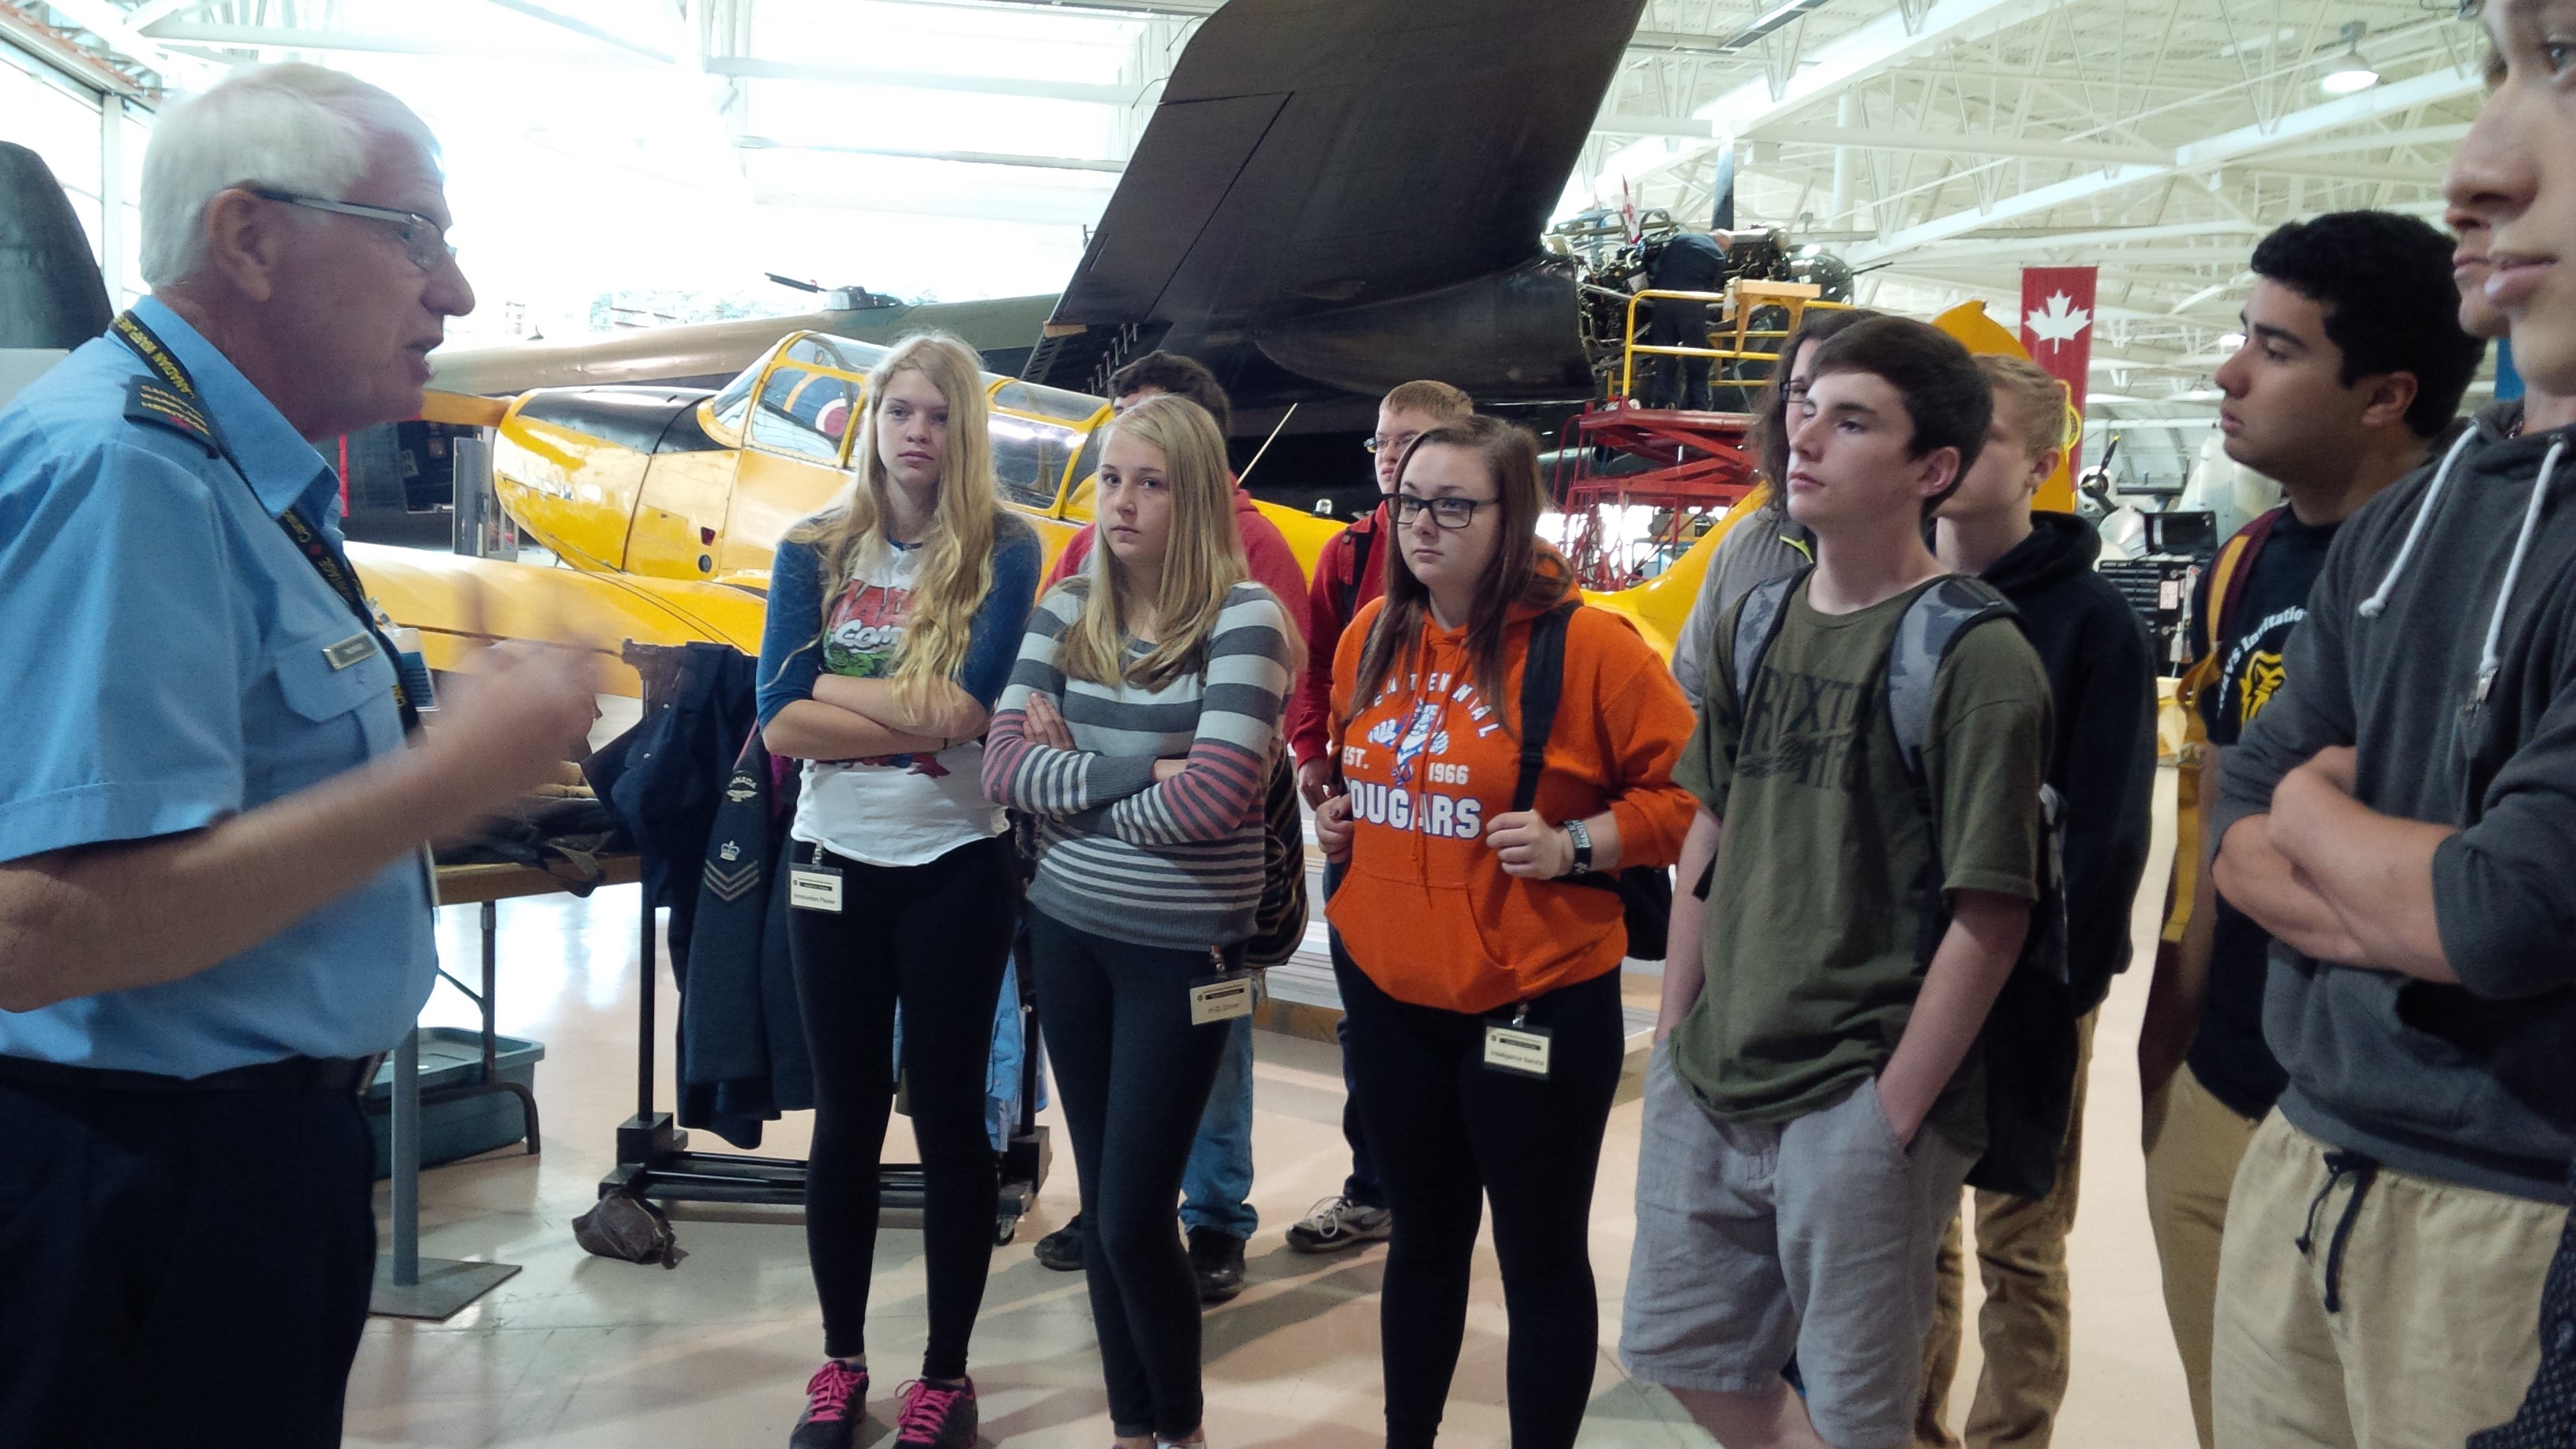 Learning about the spitfire